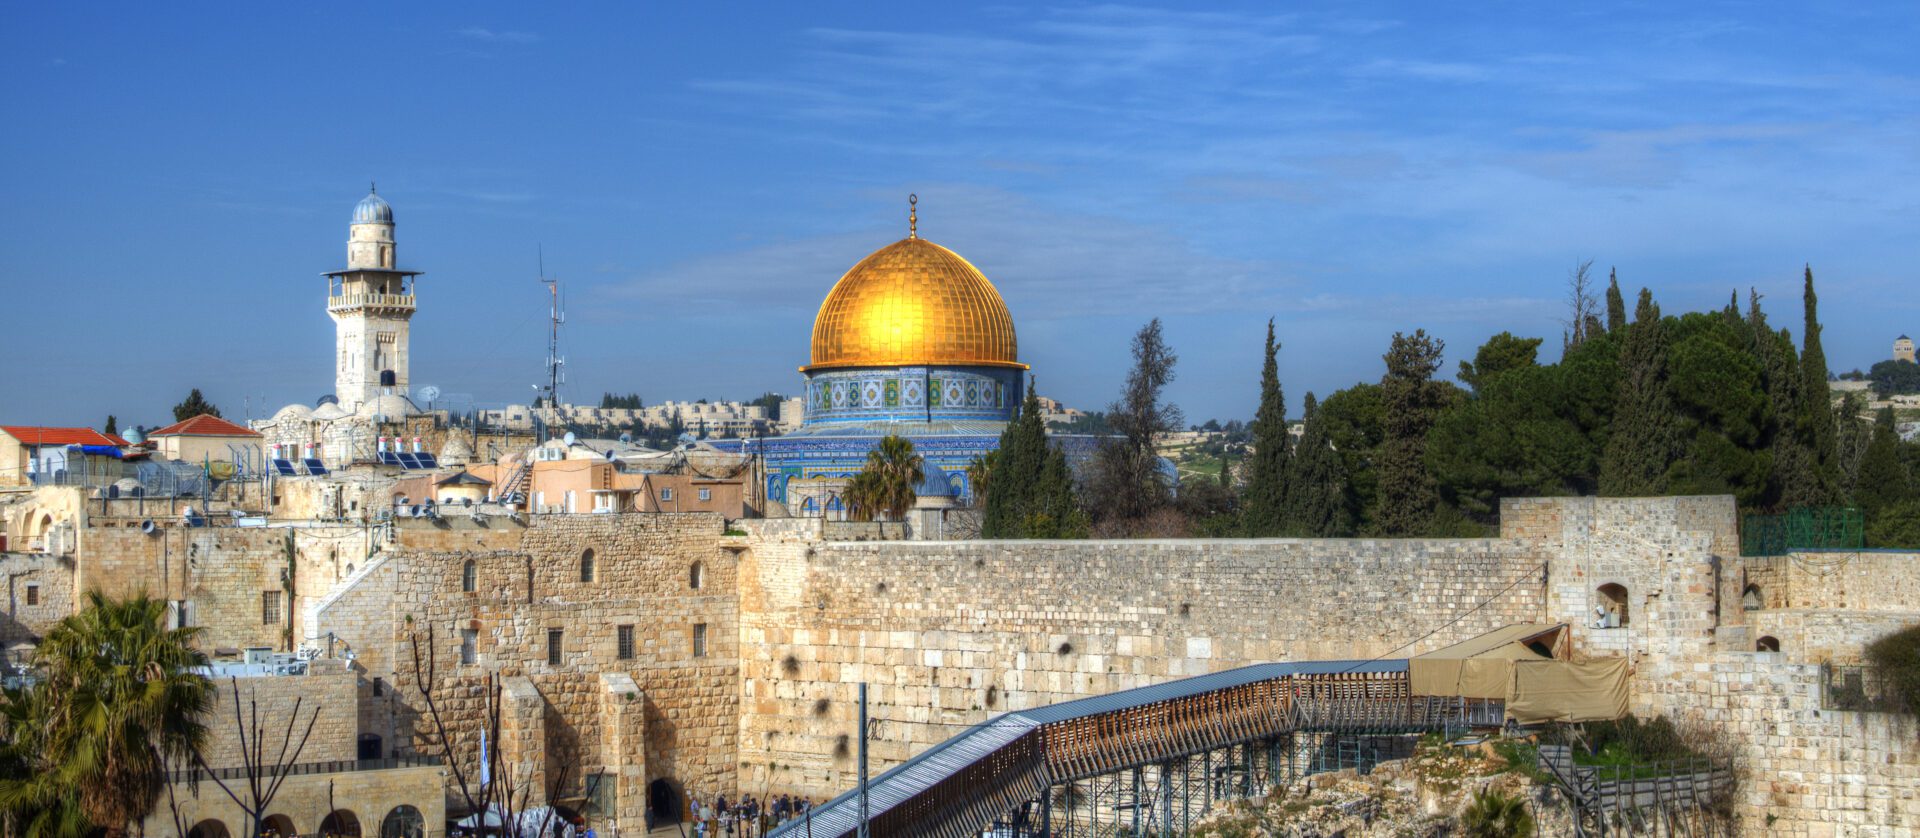 The Western Wall, also known at the Wailing Wall, is the remnant of the ancient wall that surrounded the Jewish Temple's courtyard in jerusalem, Israel. Dome of the Rock is a Muslim Shrine located on the Temple Mount.